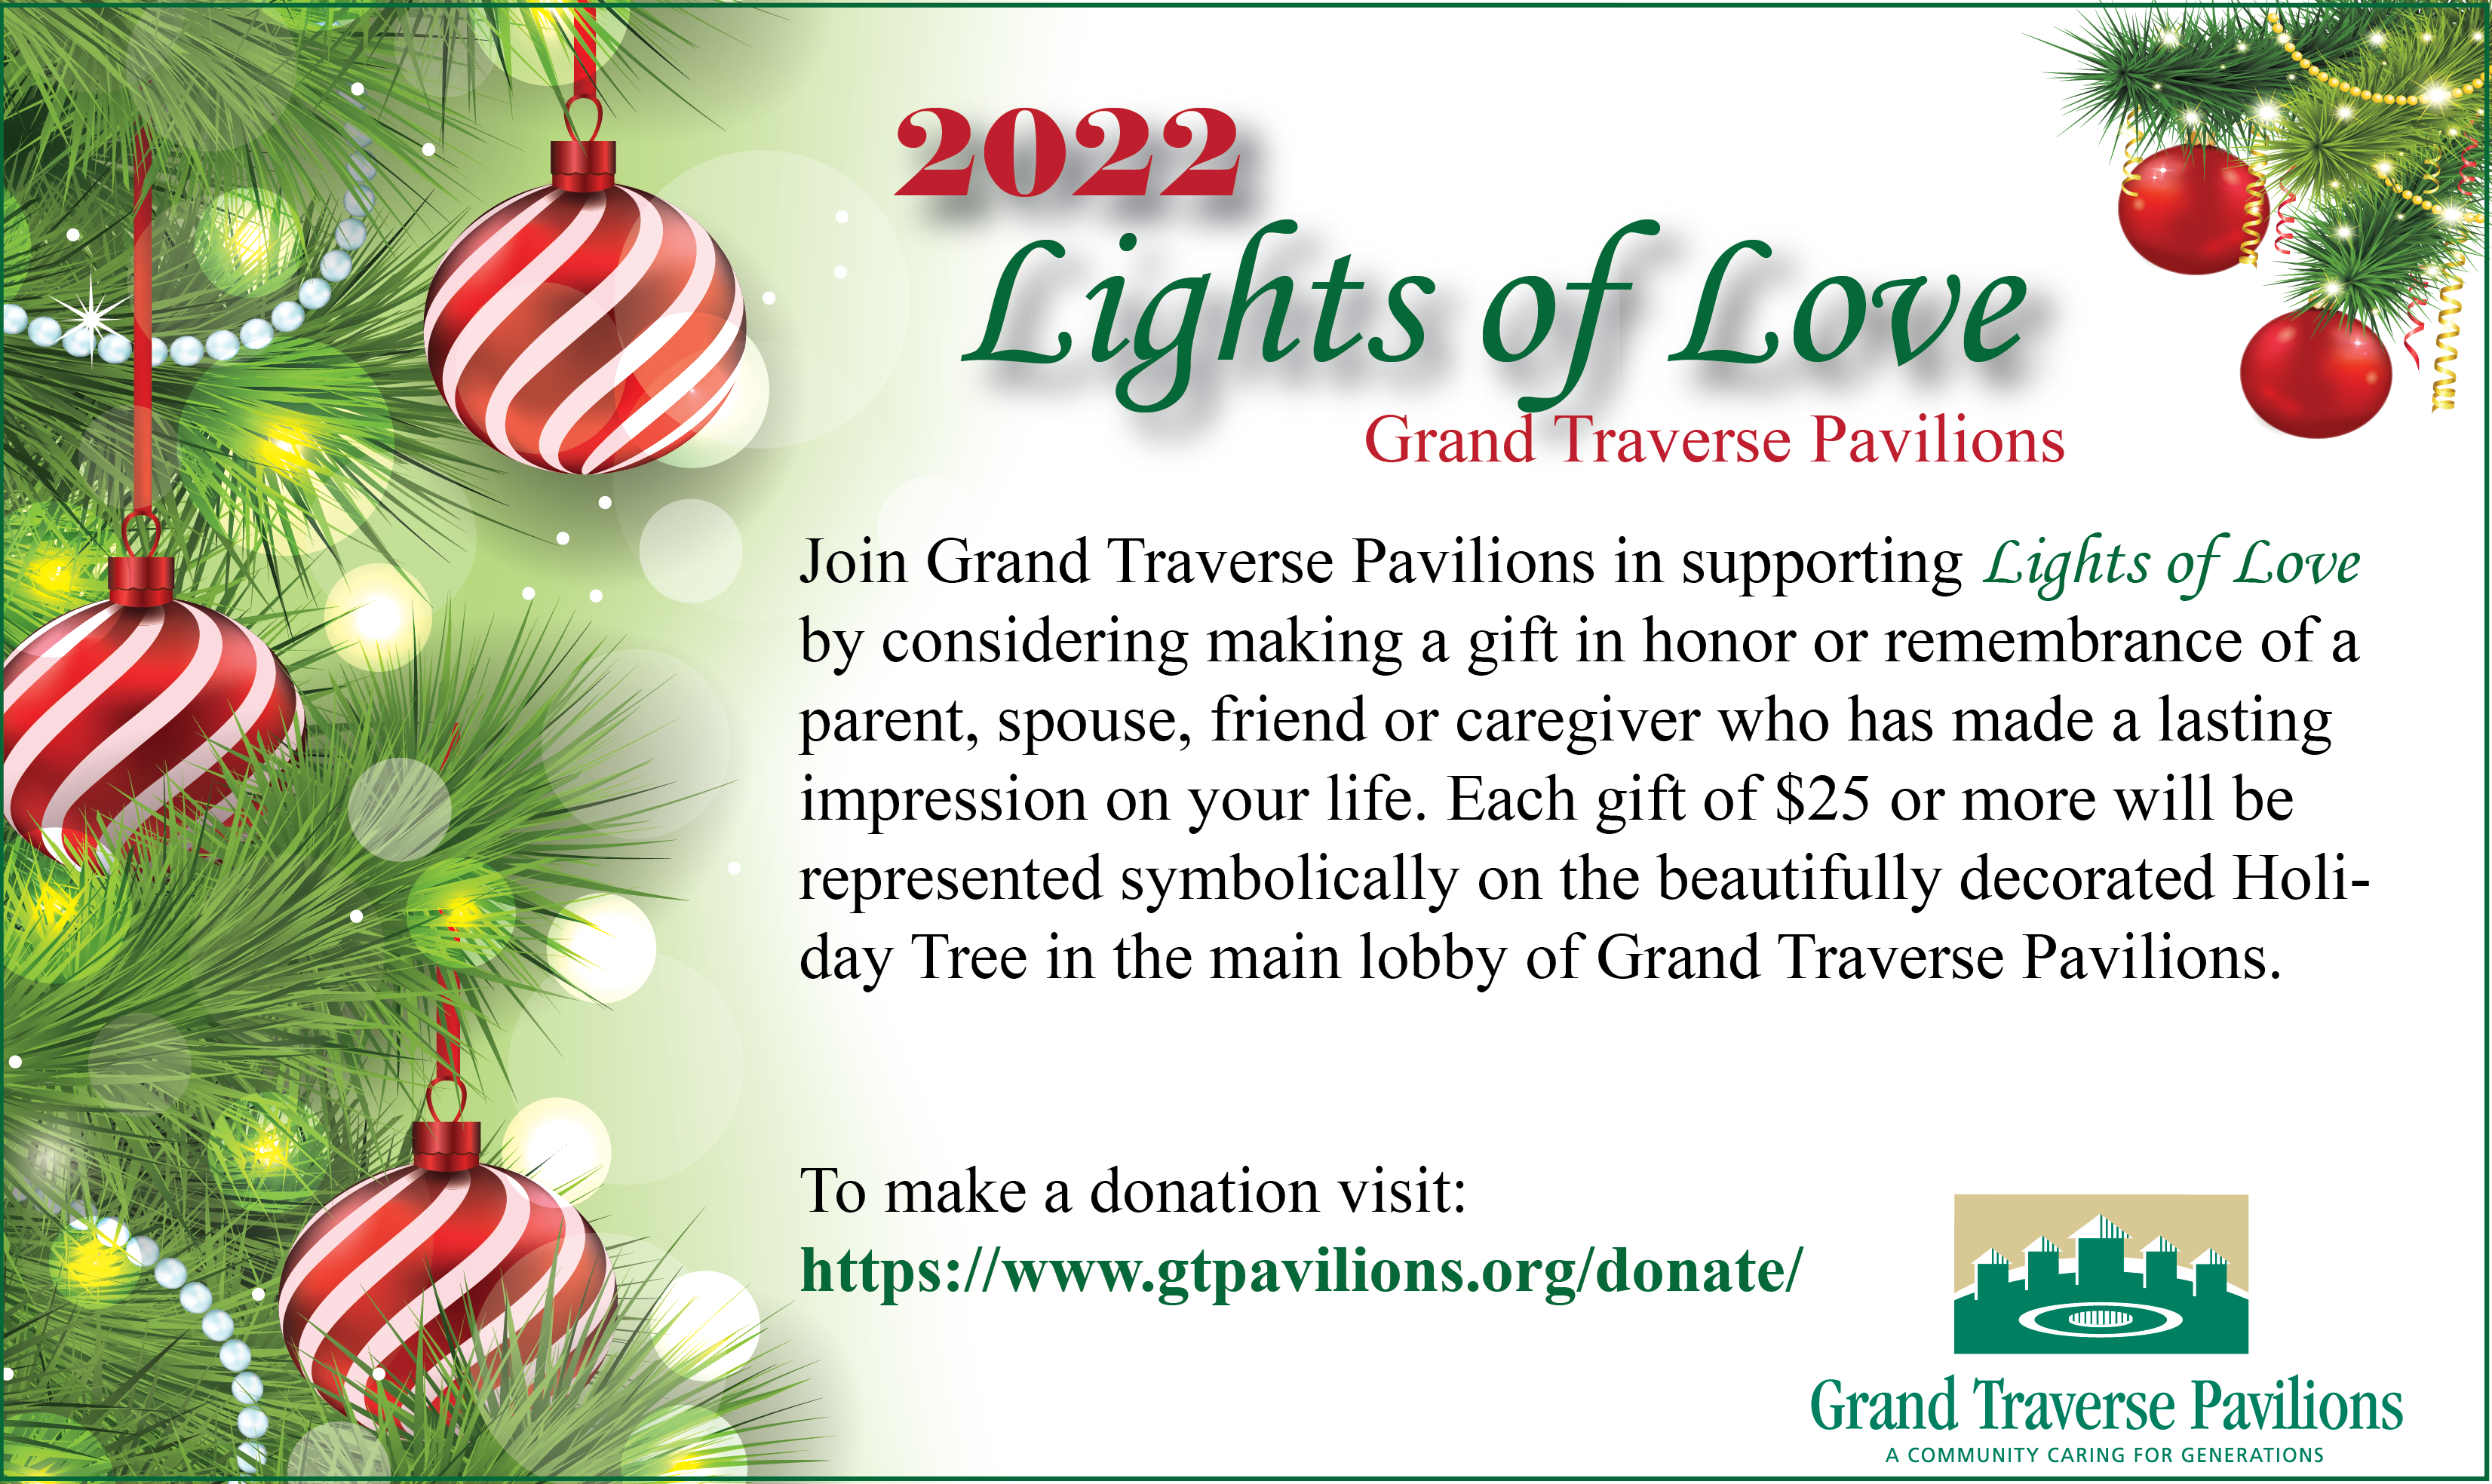 Lights of Love Campaign 